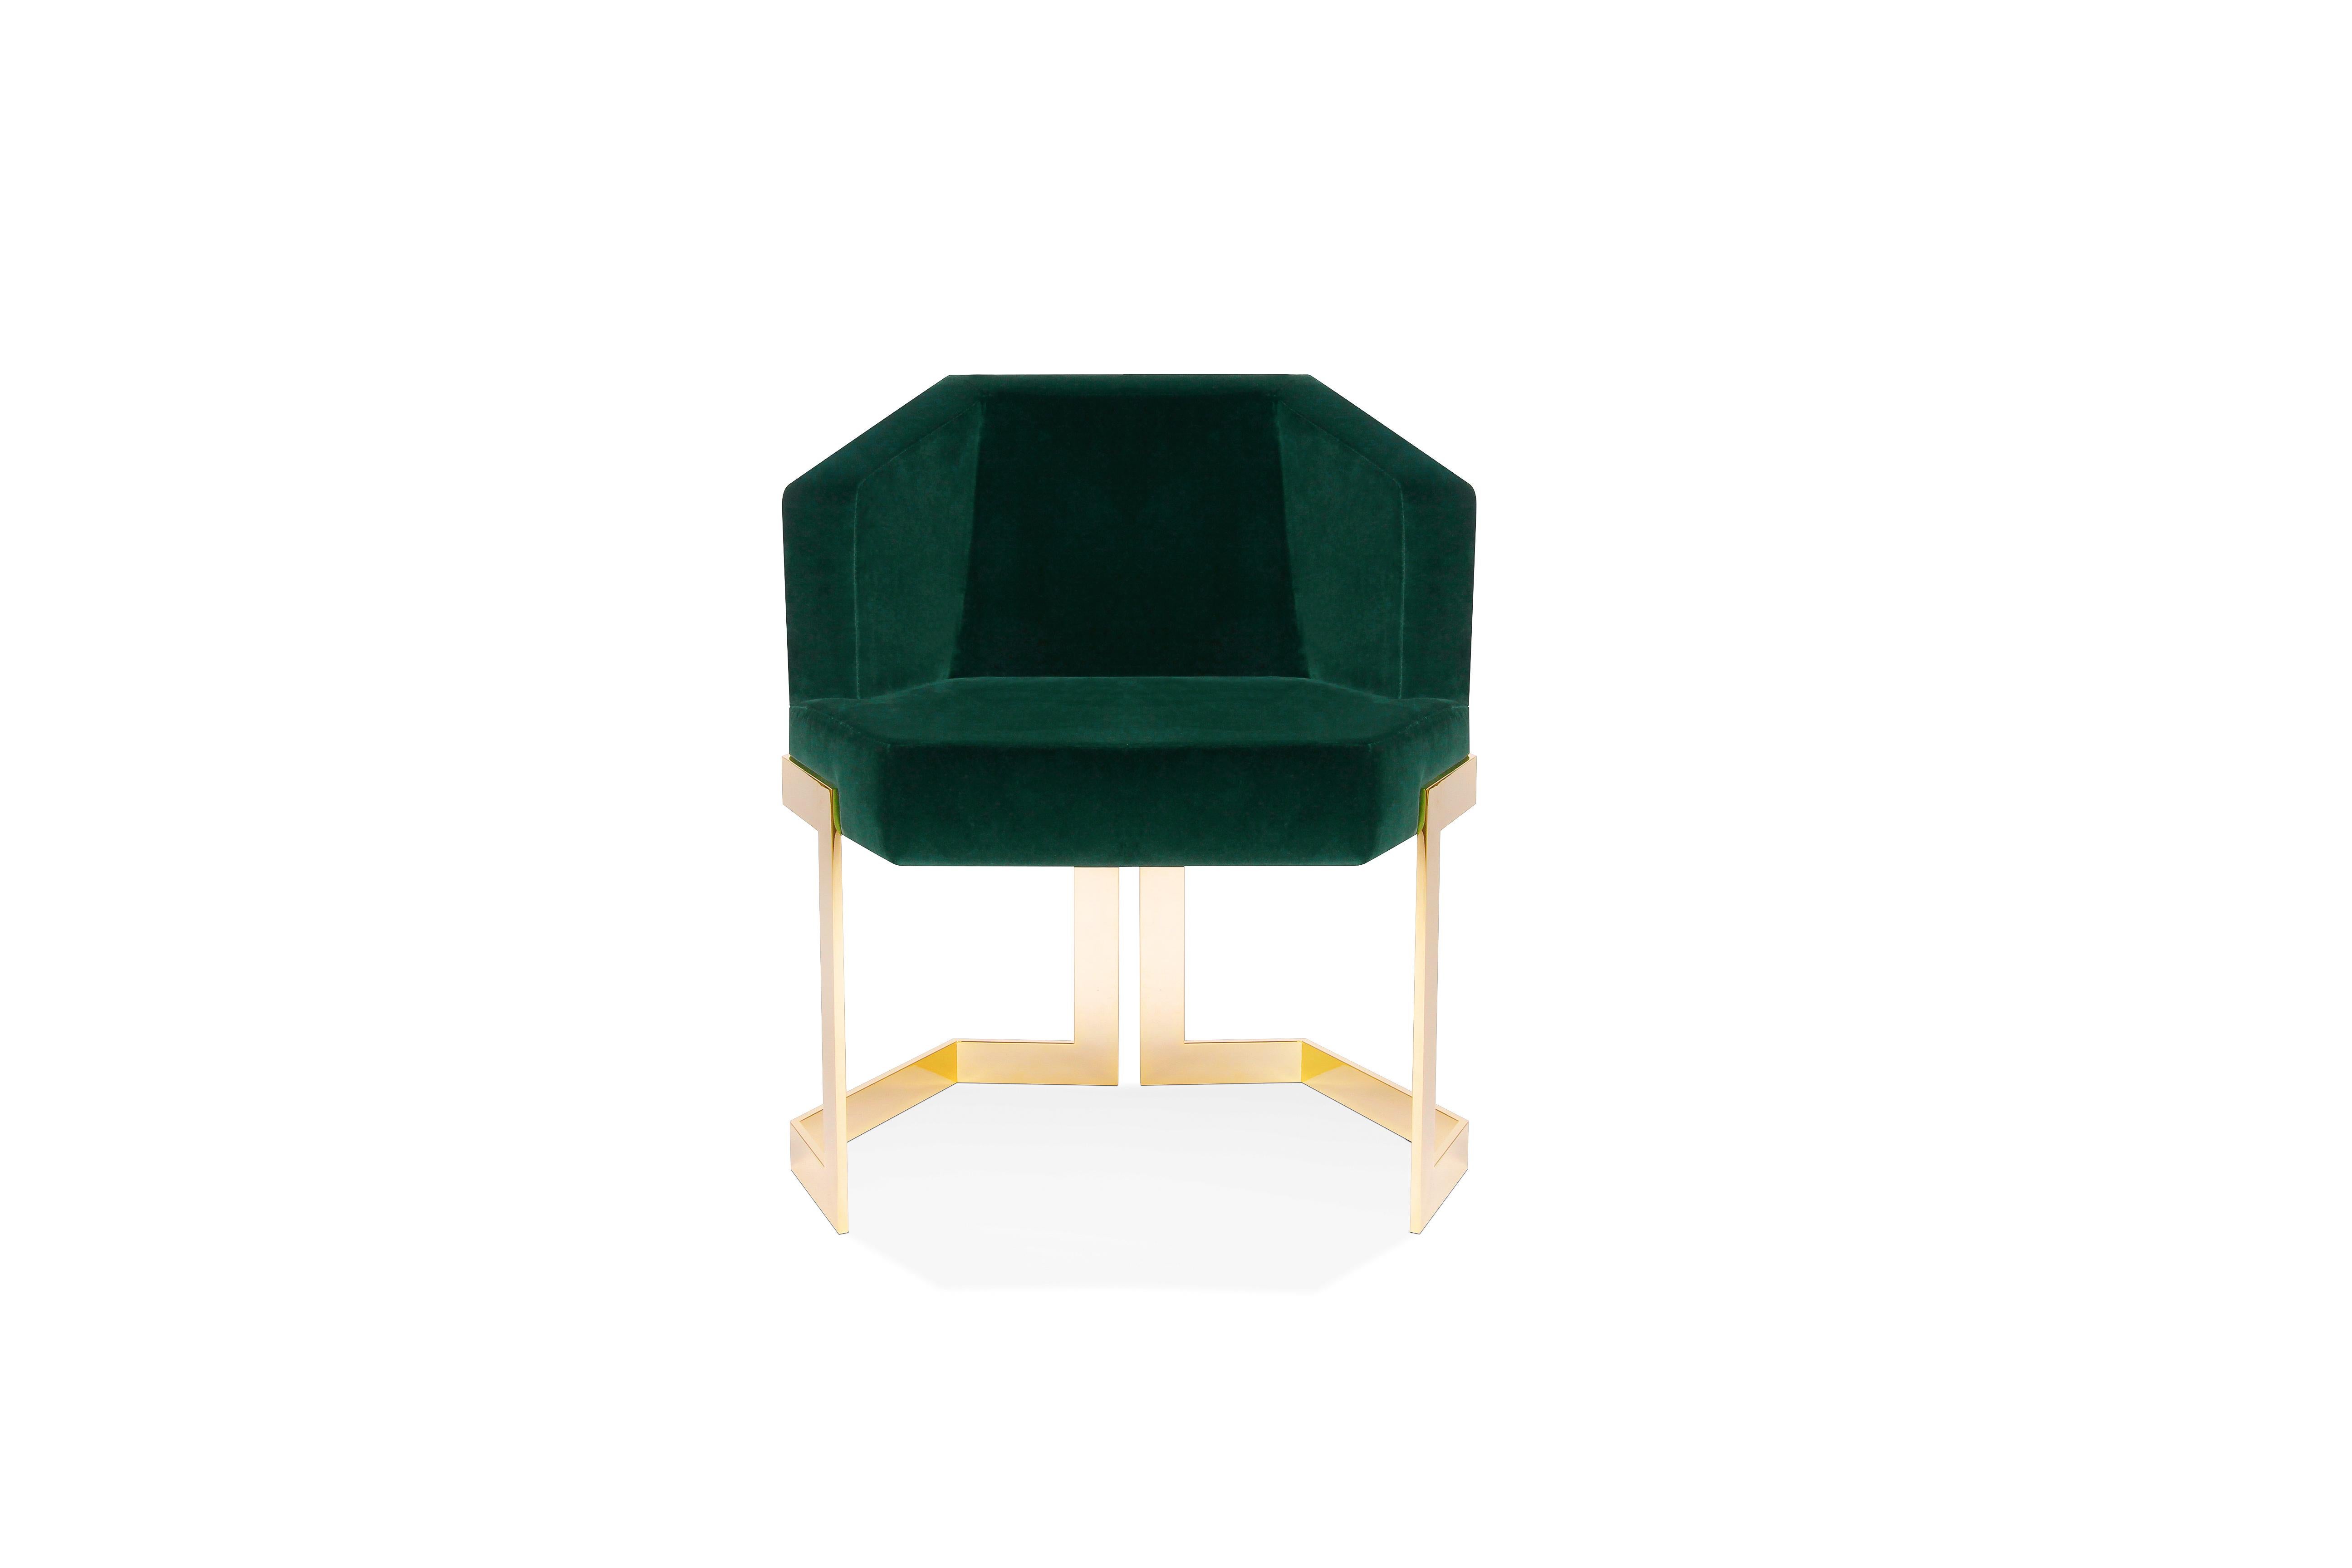 The Hive dining chair, Royal Stranger
Dimensions: 65.5 x 55 x 79 cm
Materials: Velvet. Legs polished brass.


A chair with an extremely luxurious vision. The Hive chair, as the name implies, is strong and robust in nature, its hexagonal shape